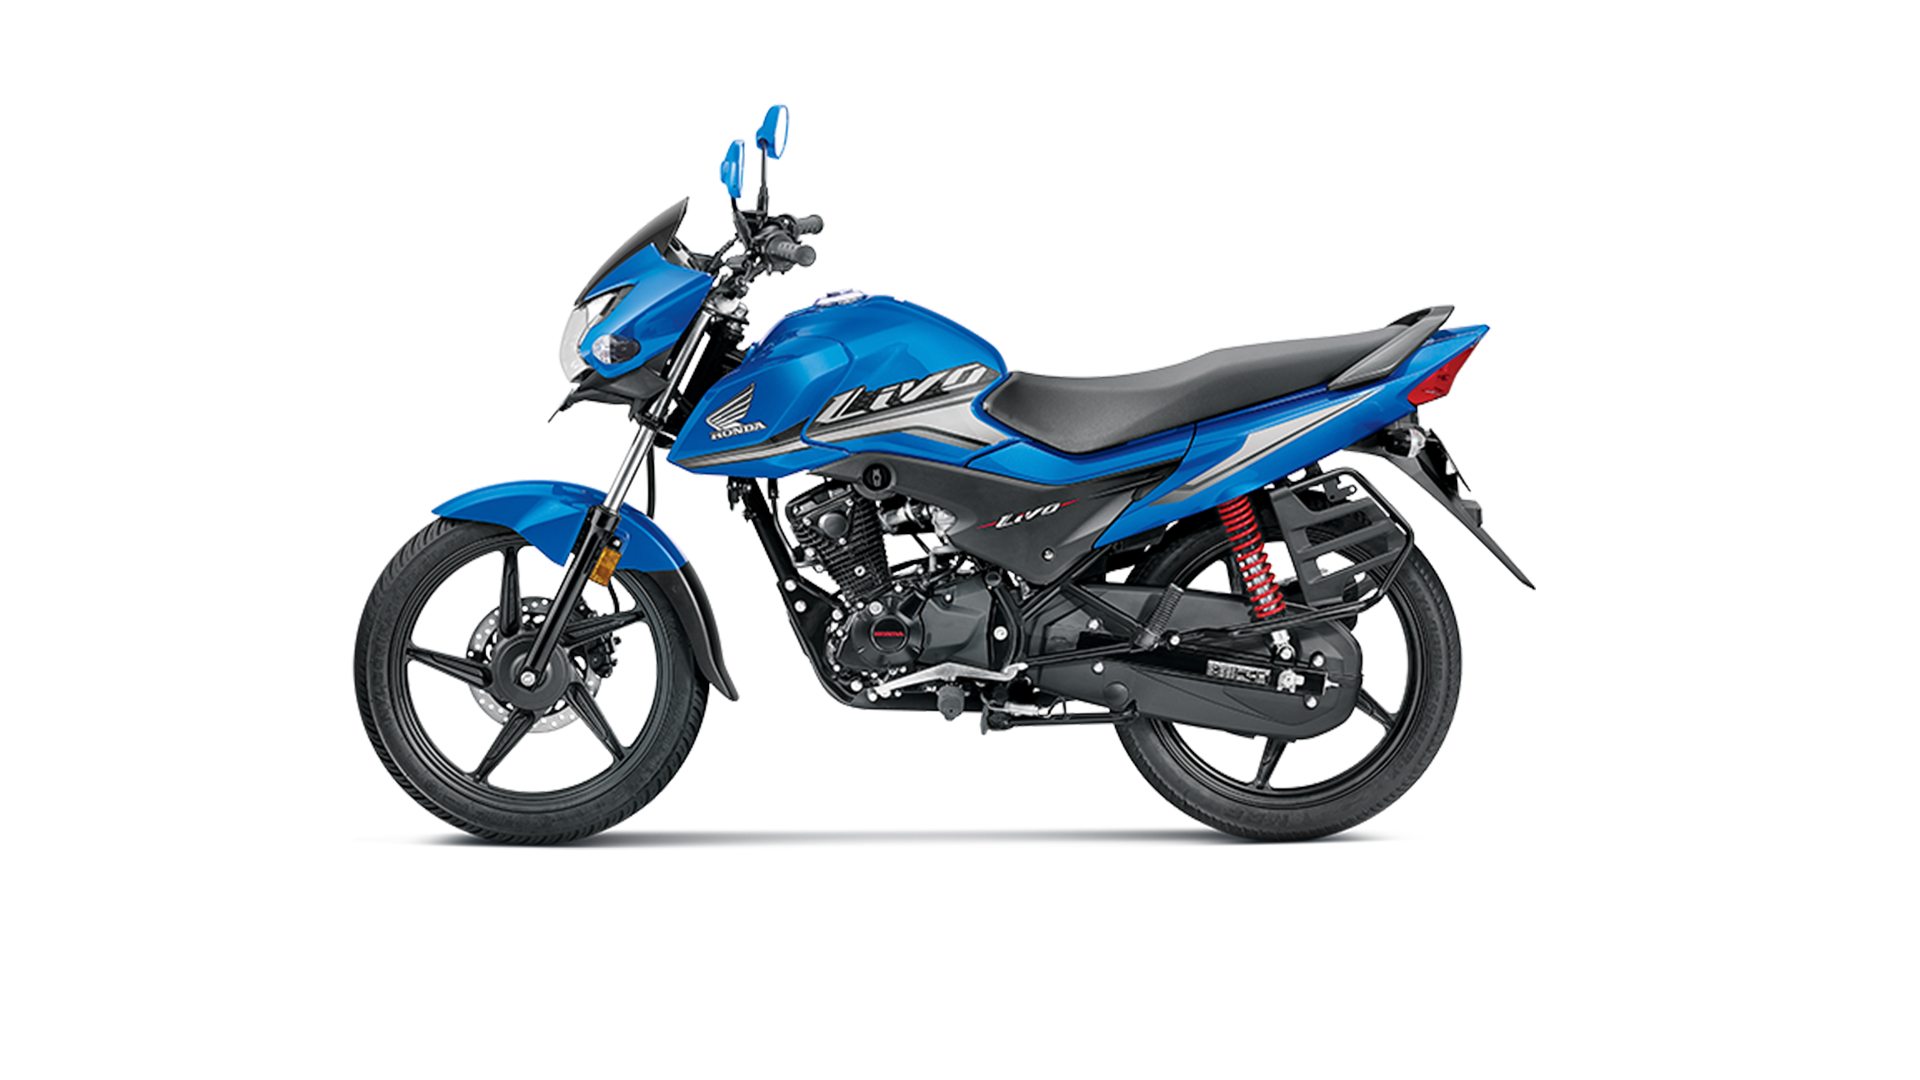 Honda Livo 2018 Drum Price Mileage Reviews Specification Gallery Overdrive